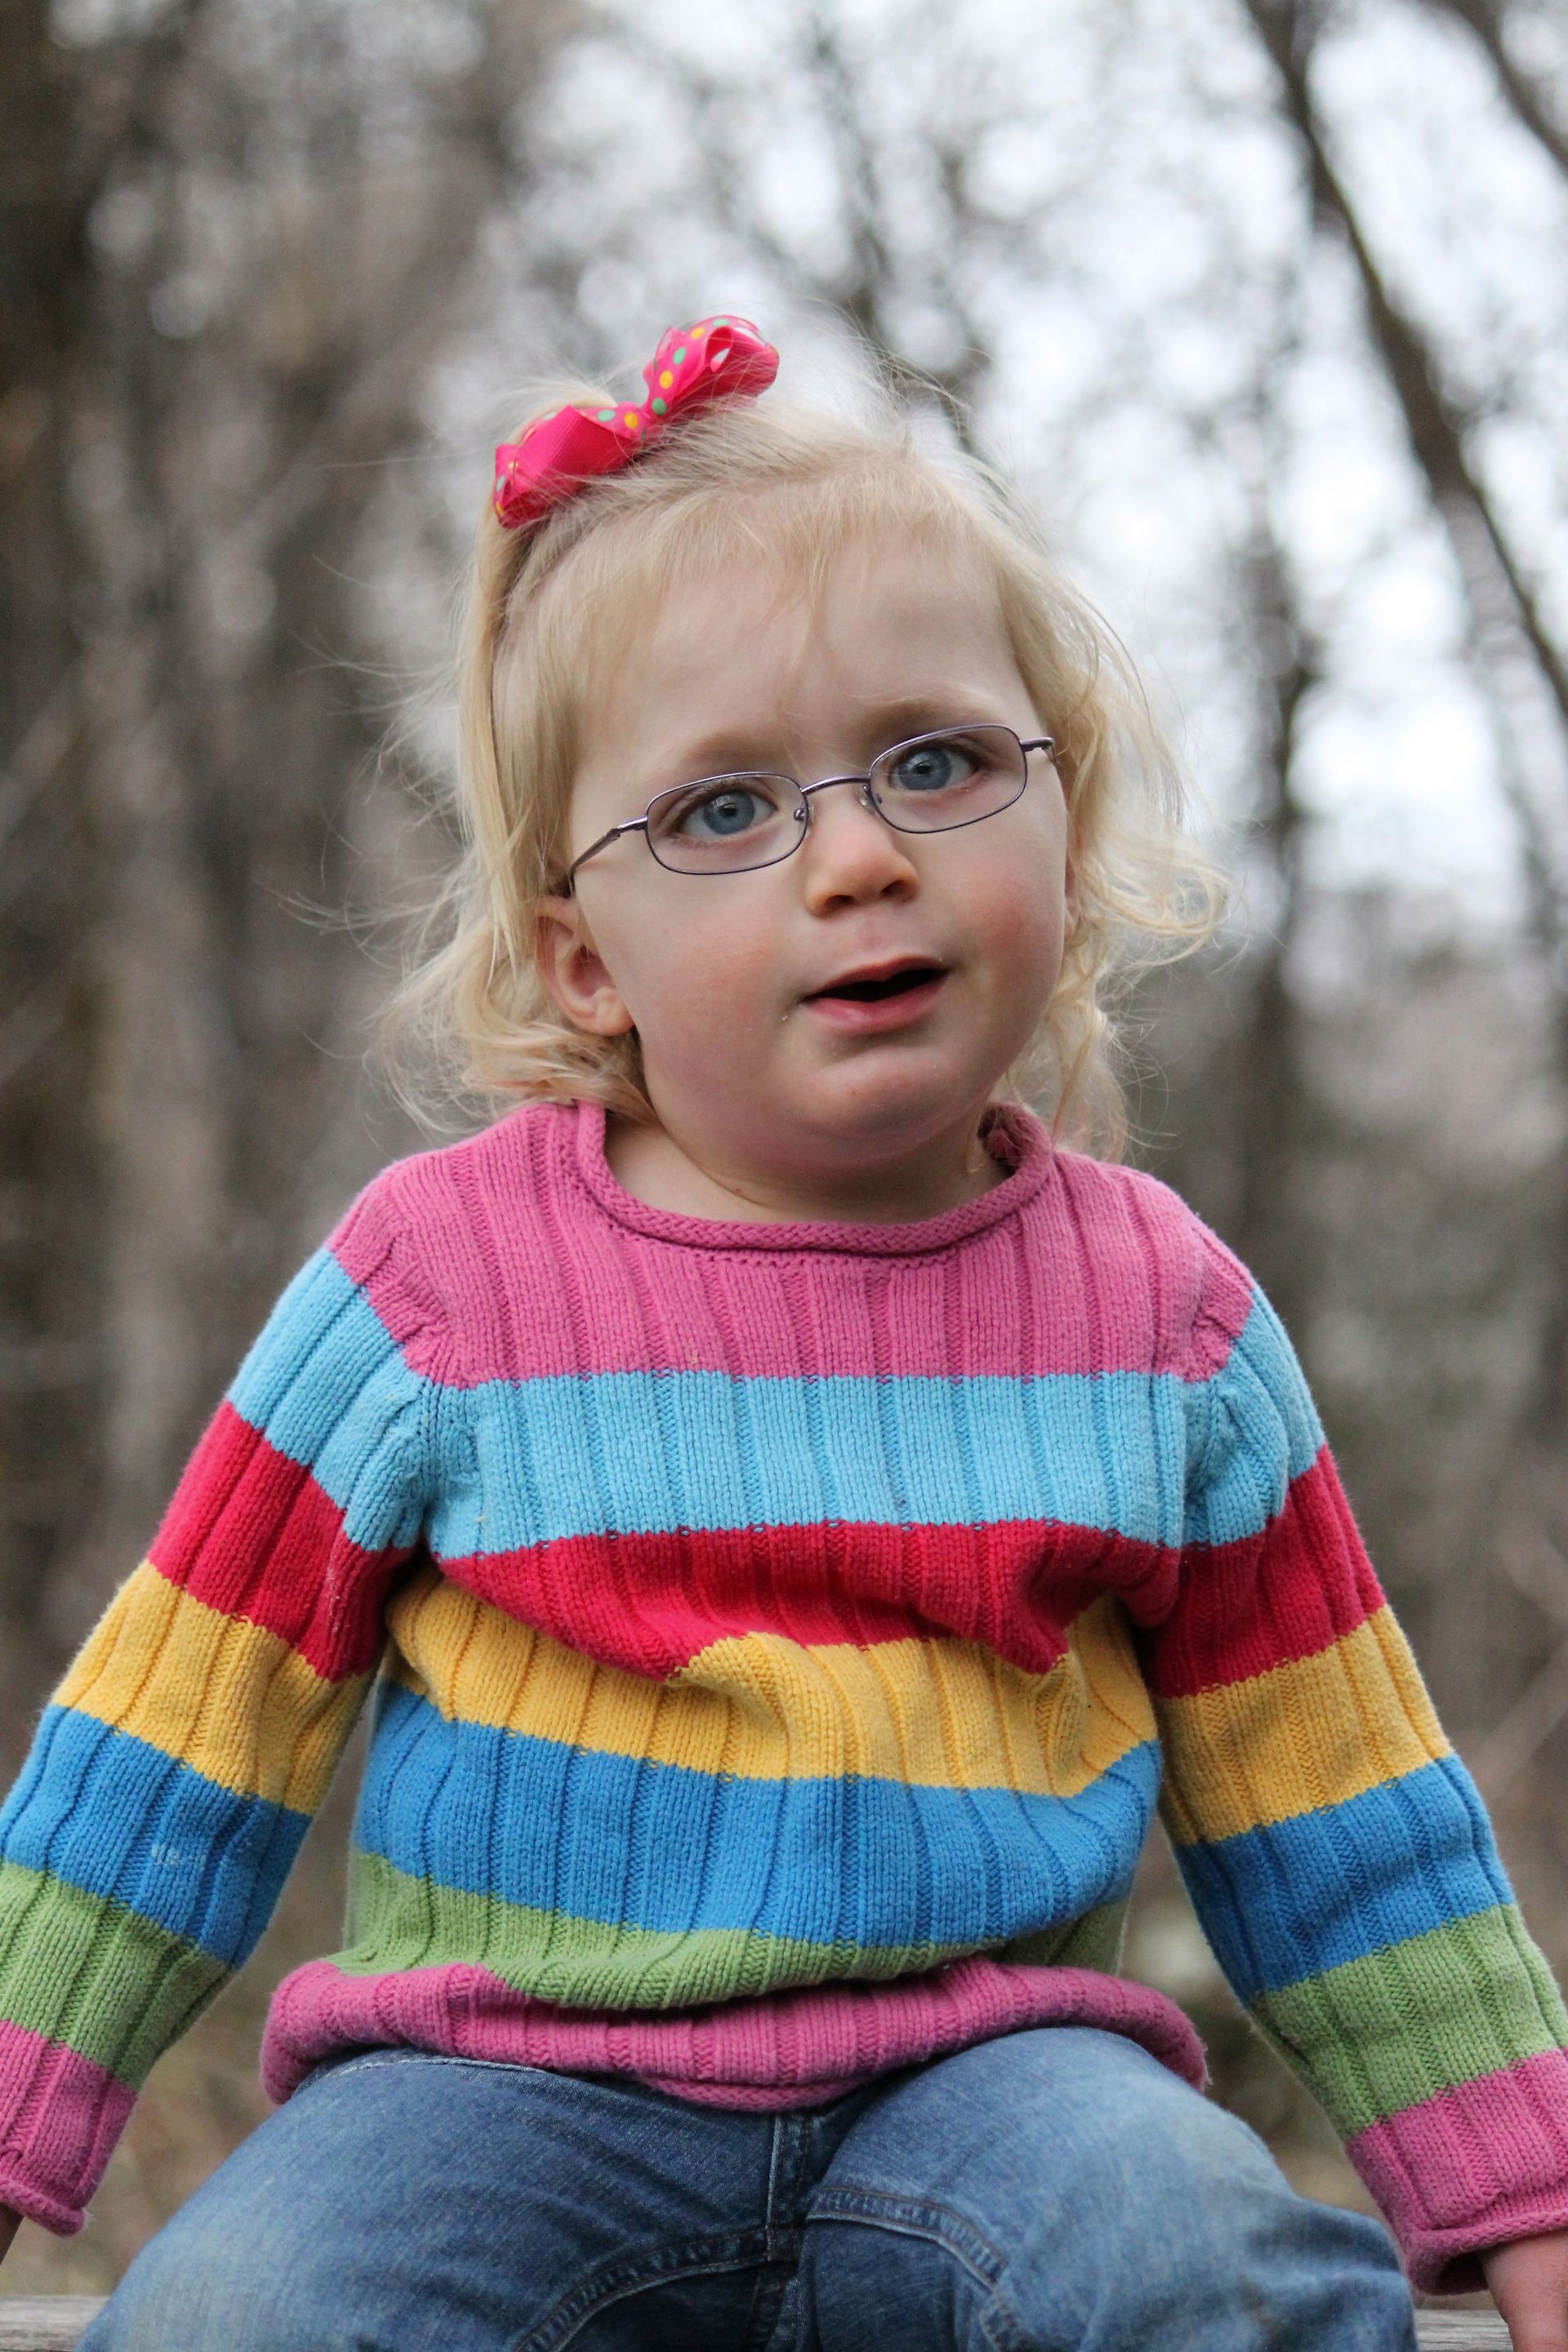 A young girl with glasses.